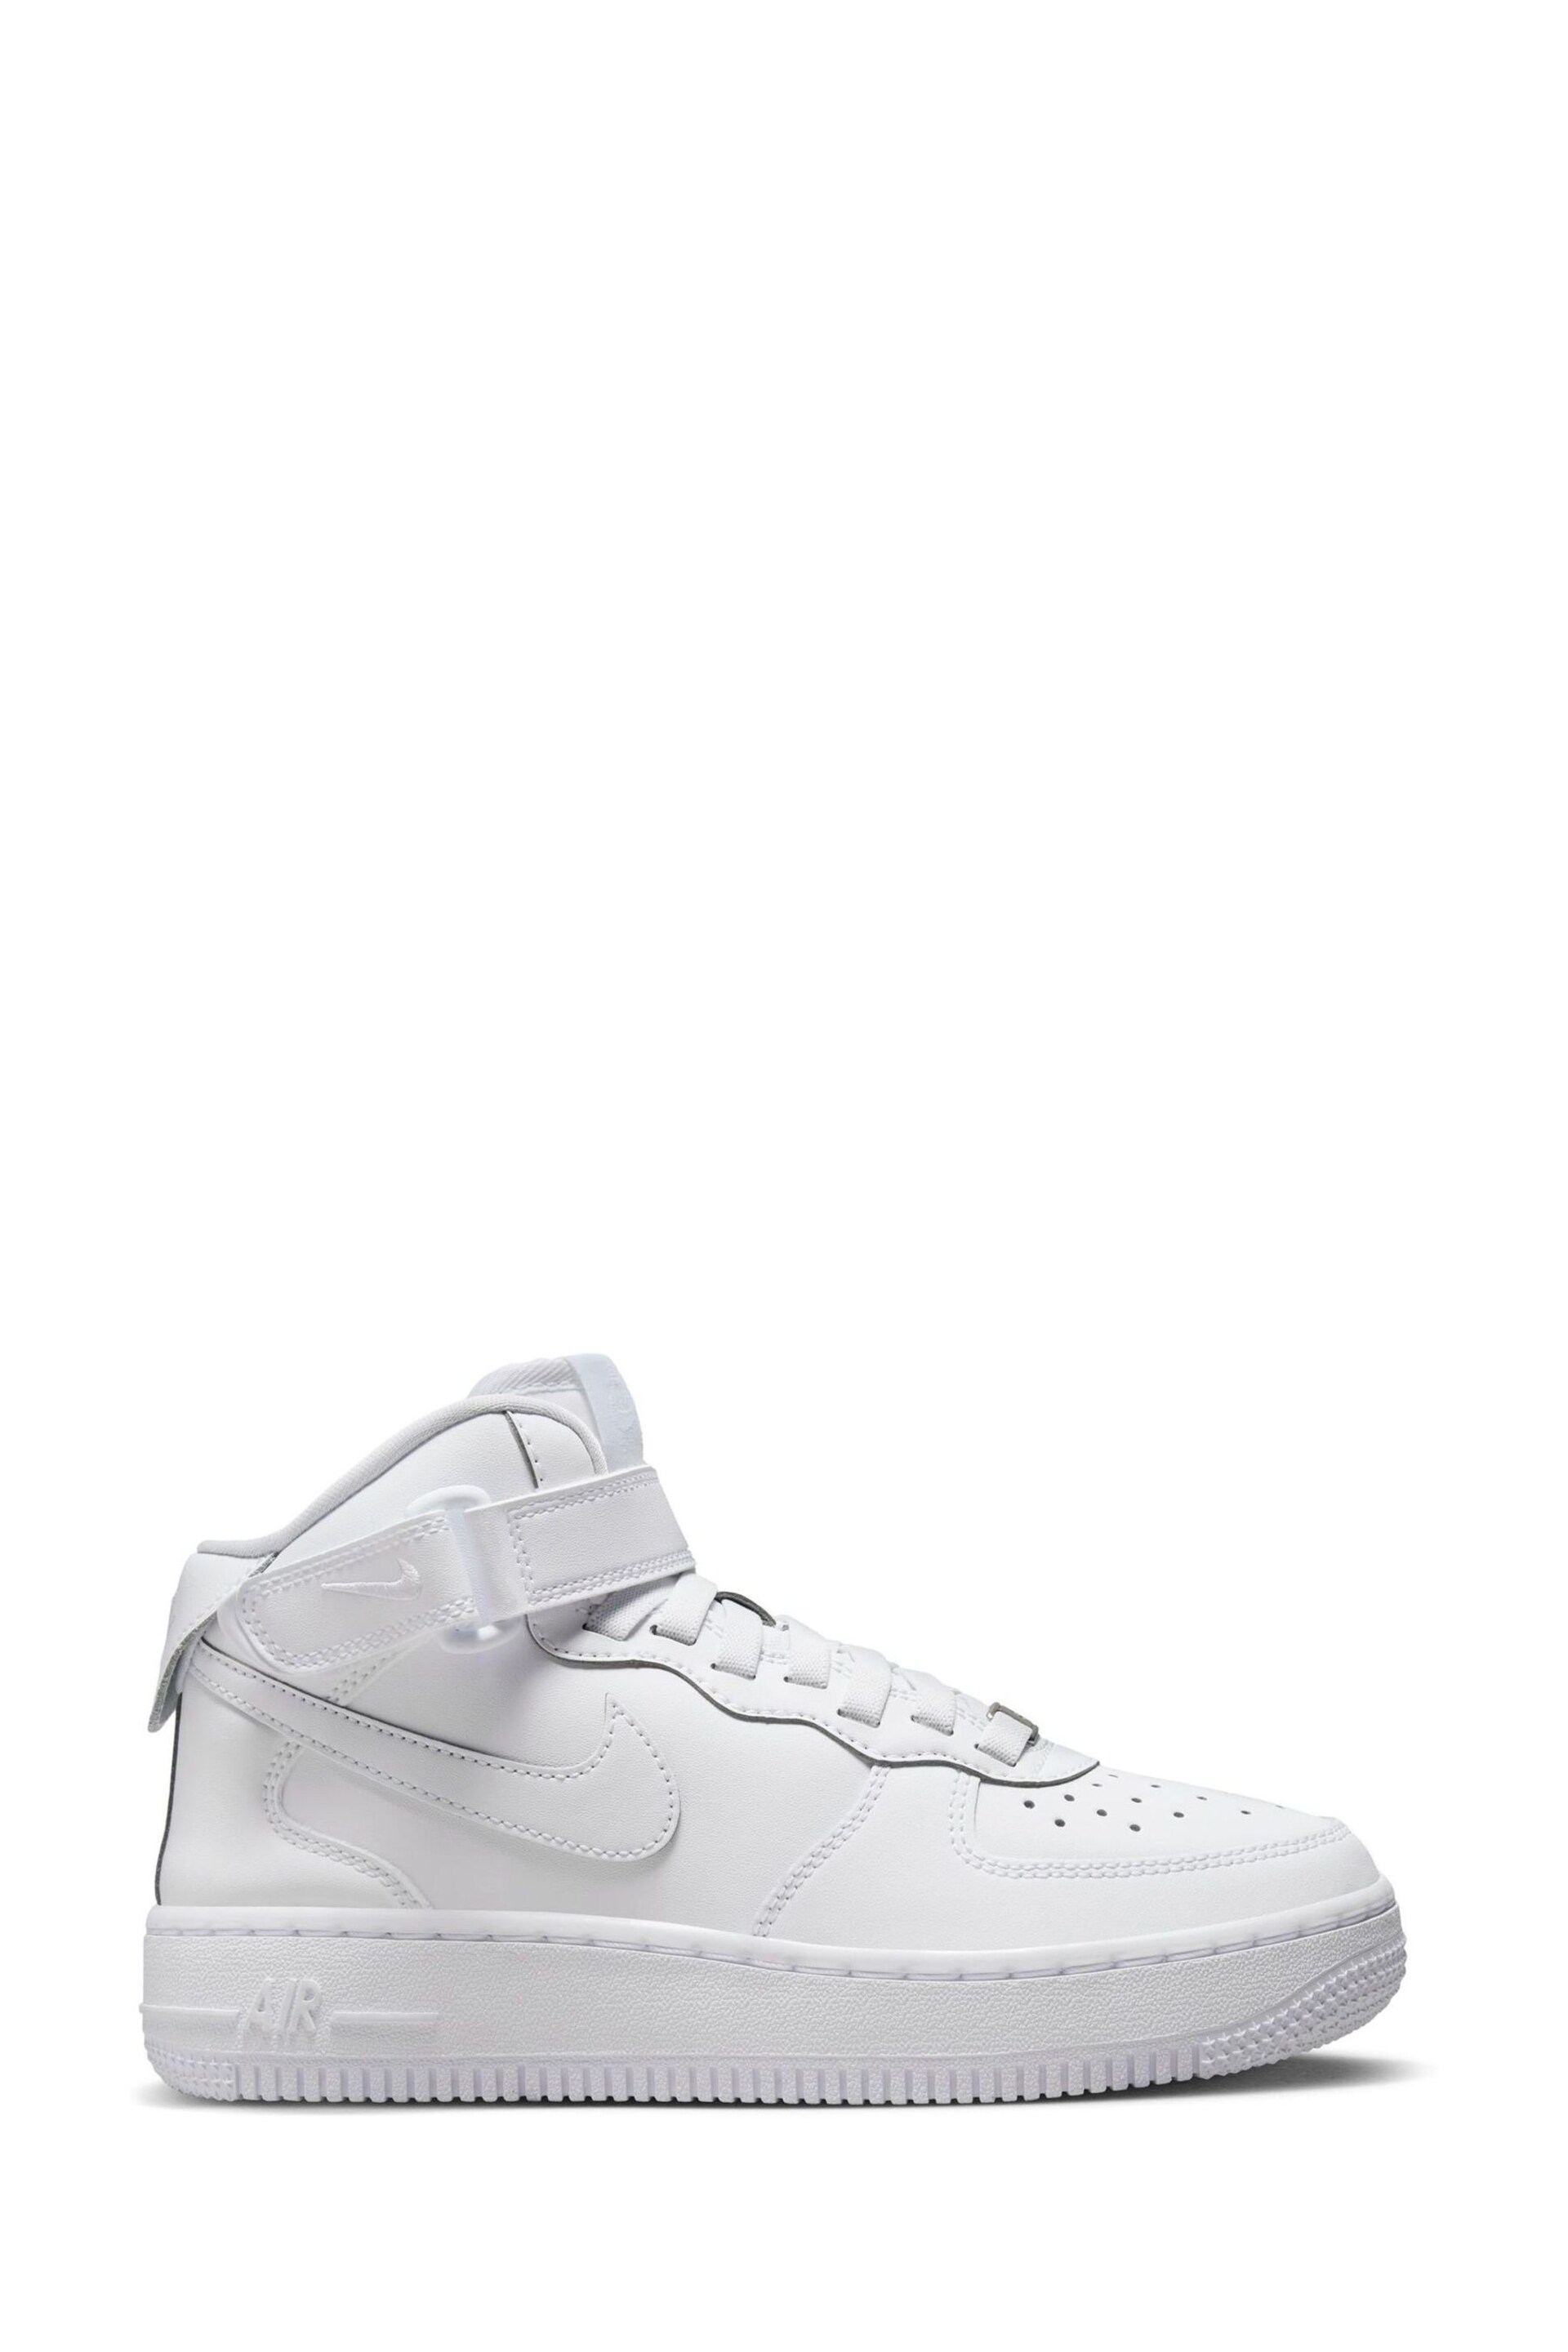 Nike White Youth Air Force 1 Mid EasyOn Trainers - Image 1 of 13